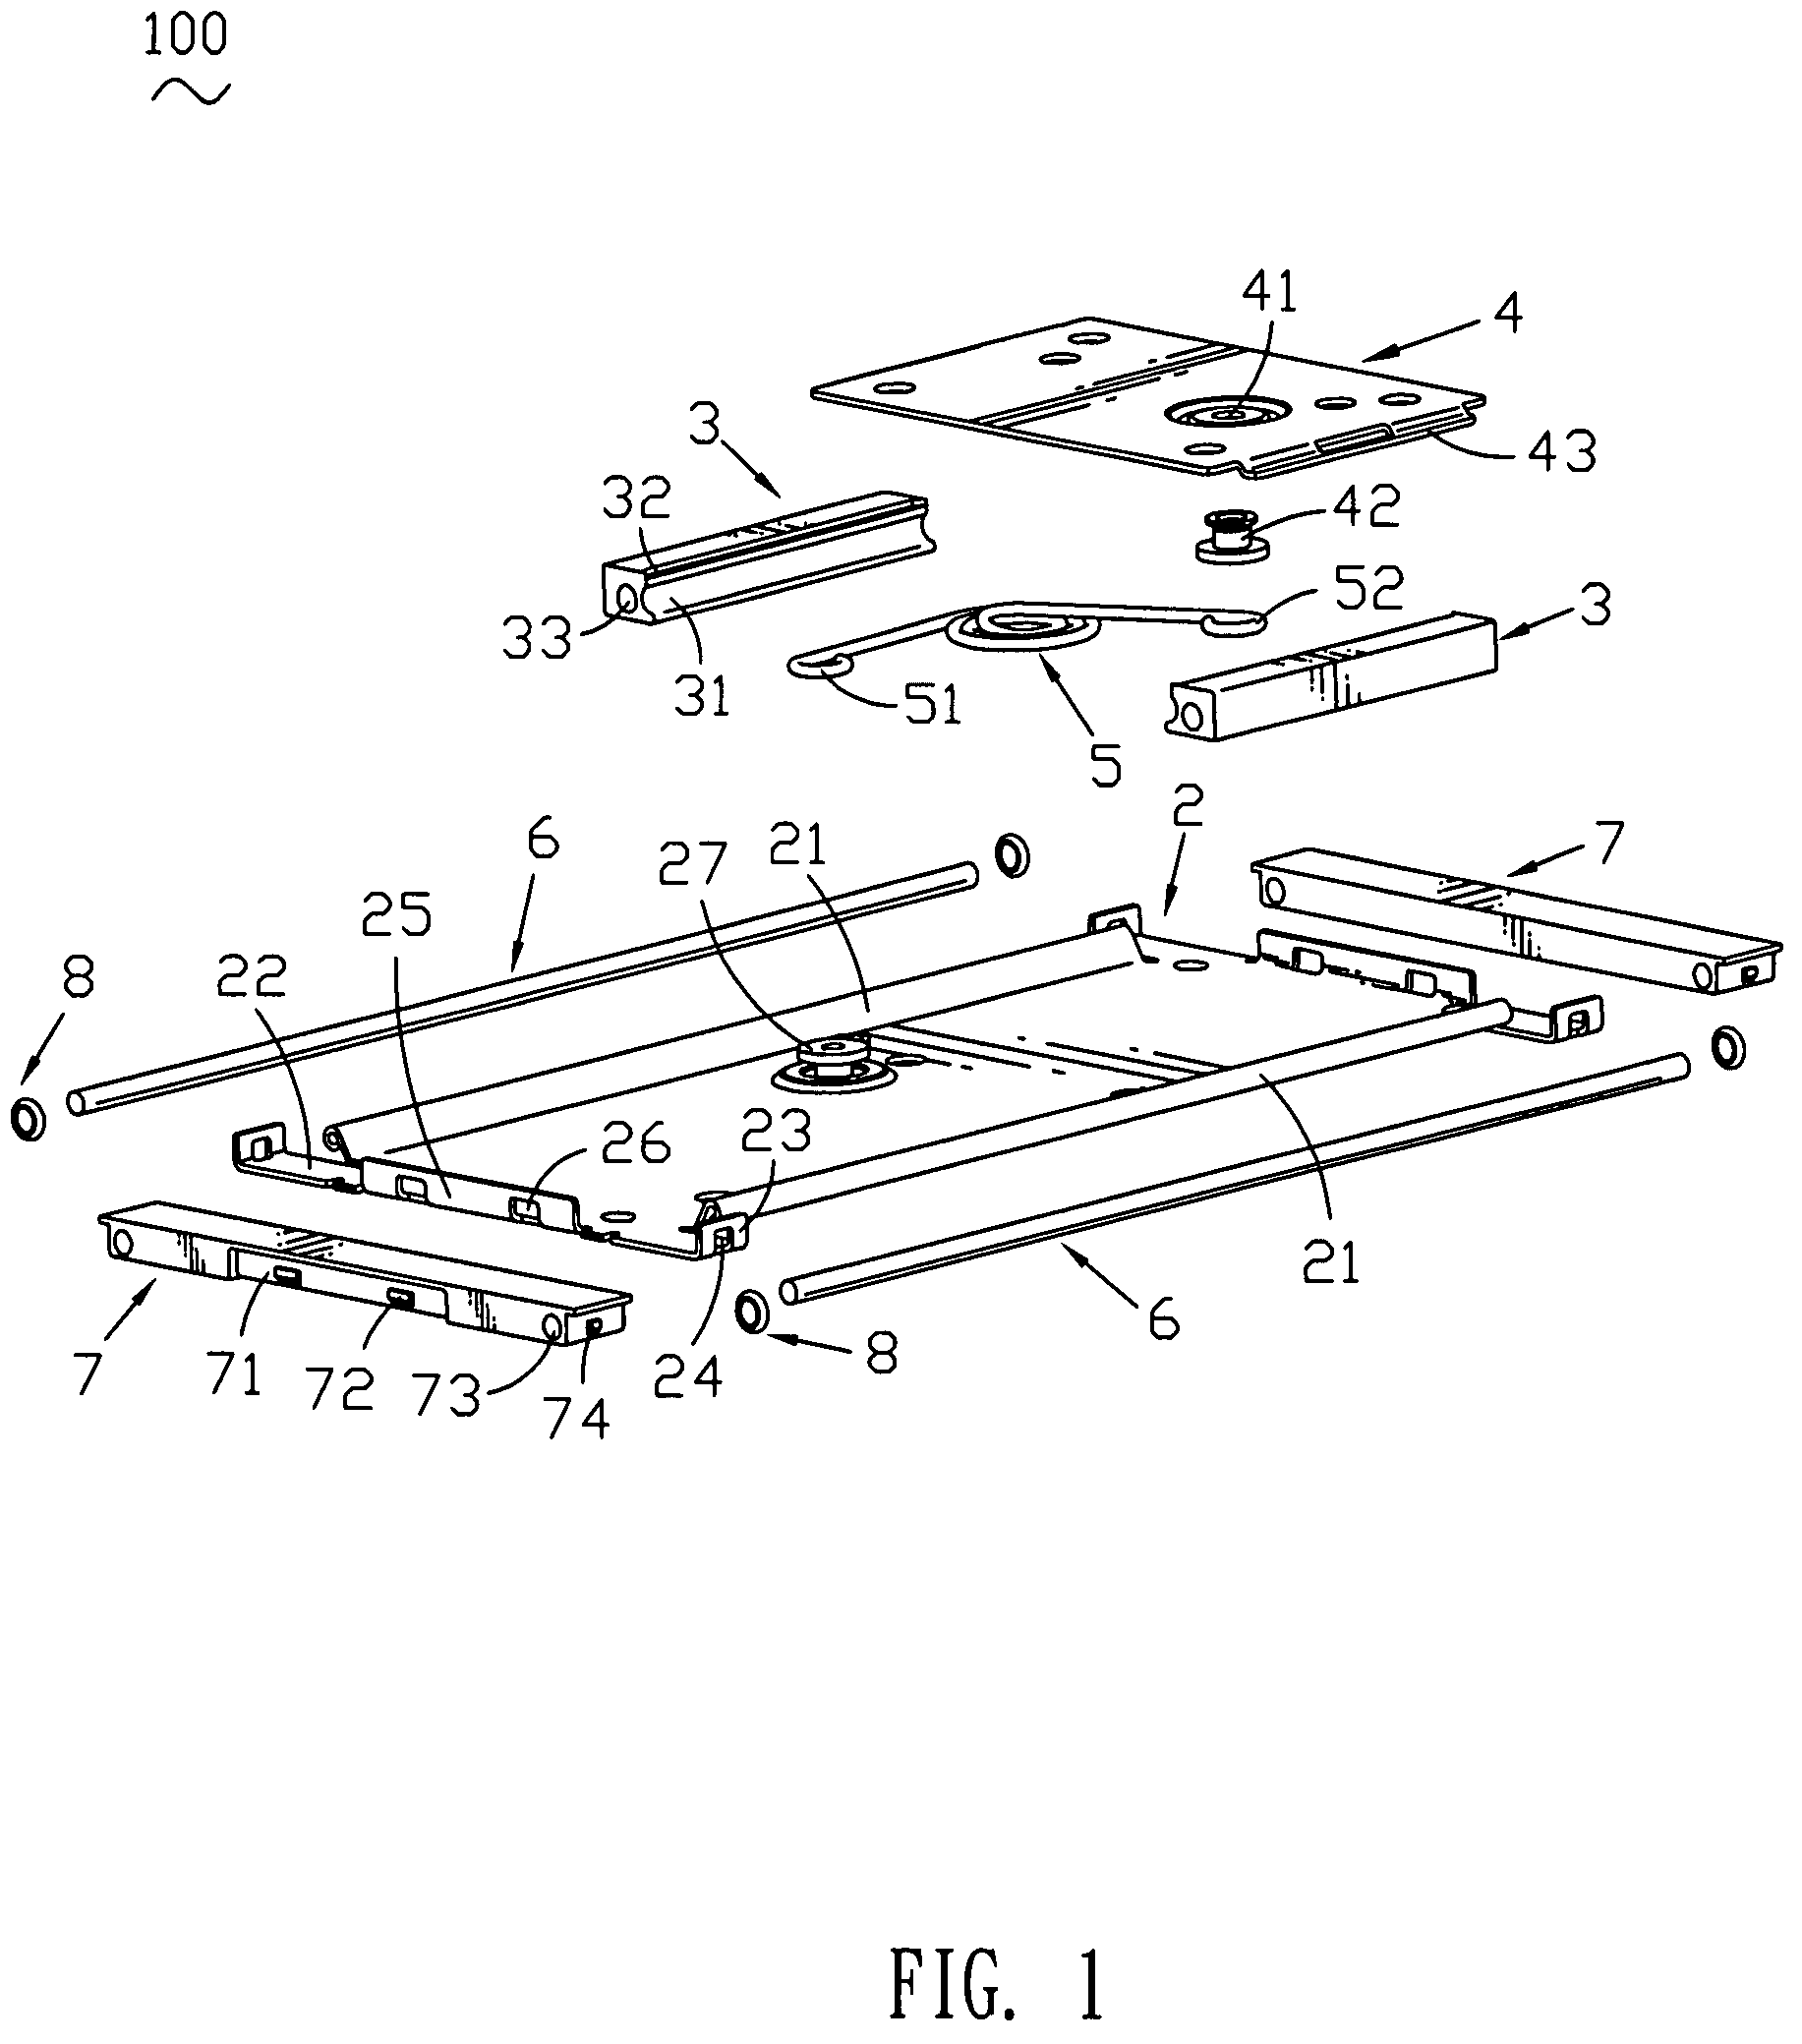 Slide module for a slide type electronic device